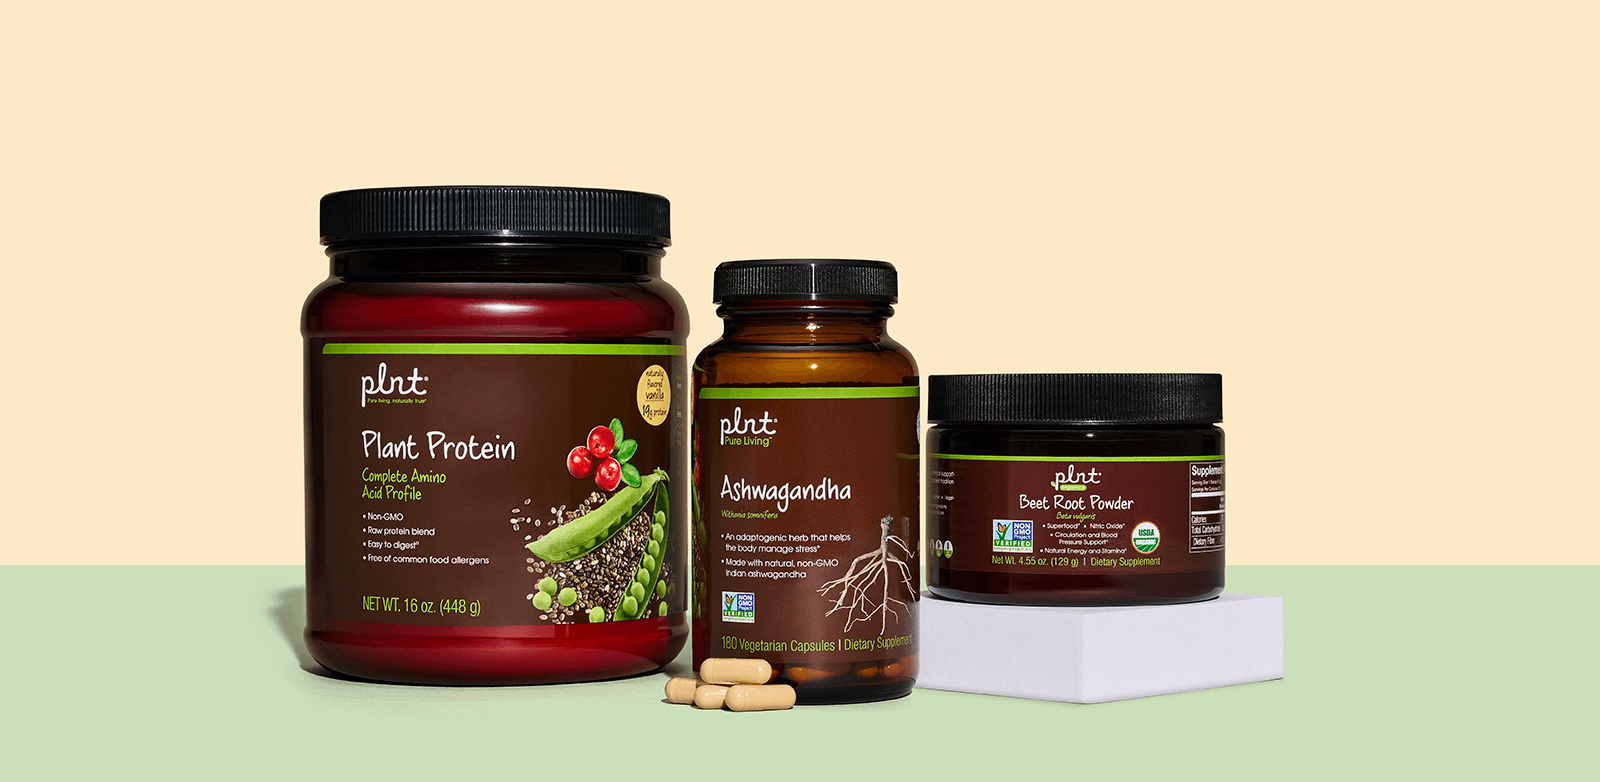 plnt supplements on colorful background